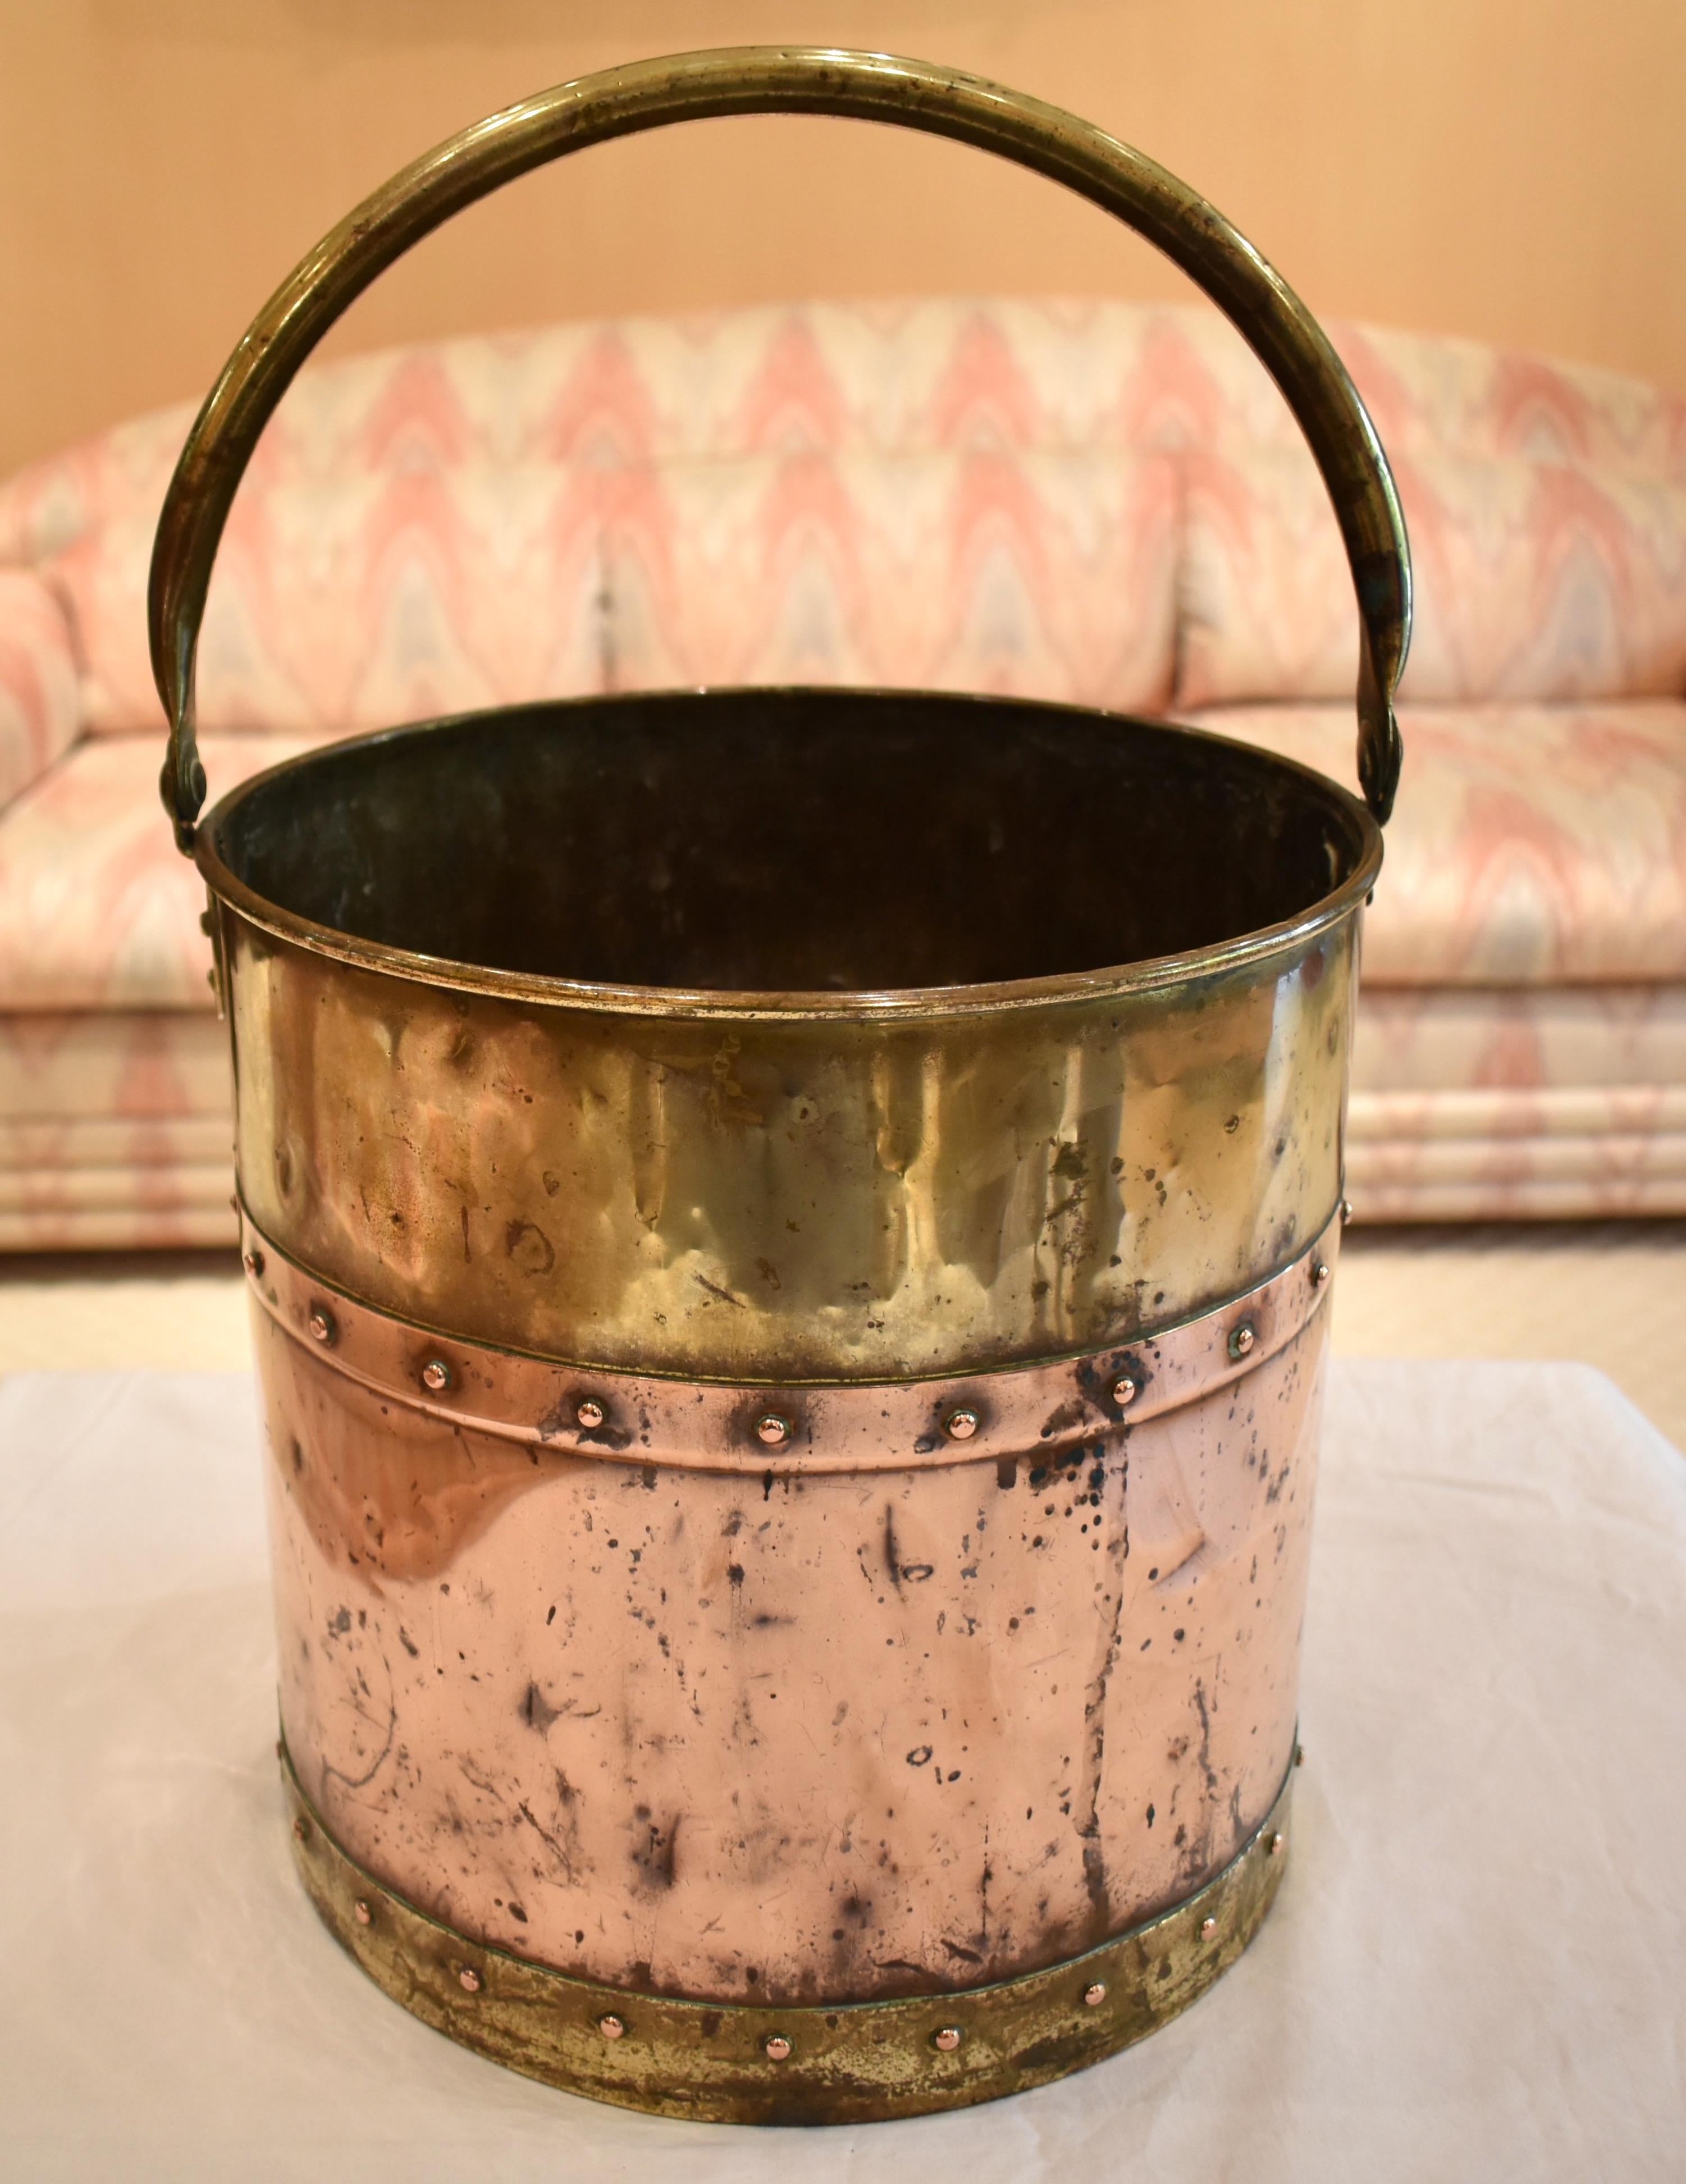 19th century antique copper and brass coal bucket with a brass swing handle attached to a lovely round copper and brass bucket. Gathered wonderful character over the years and in lovely condition, circa 1800.